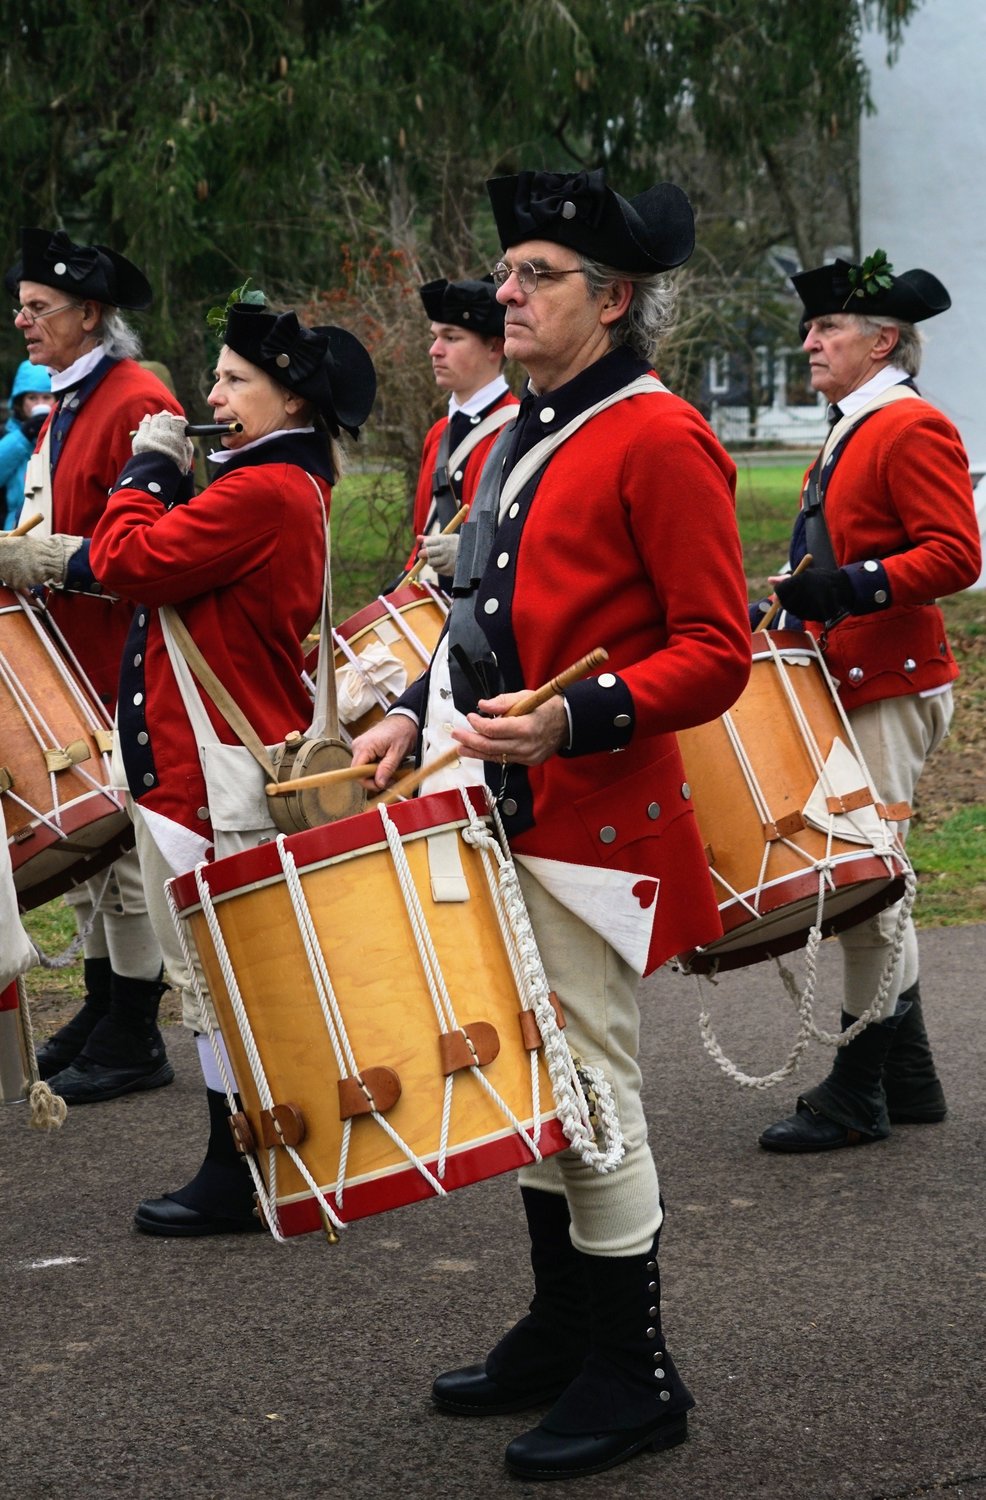 Members of a fife and drum corps perform at the first of two
Delaware River Crossings.